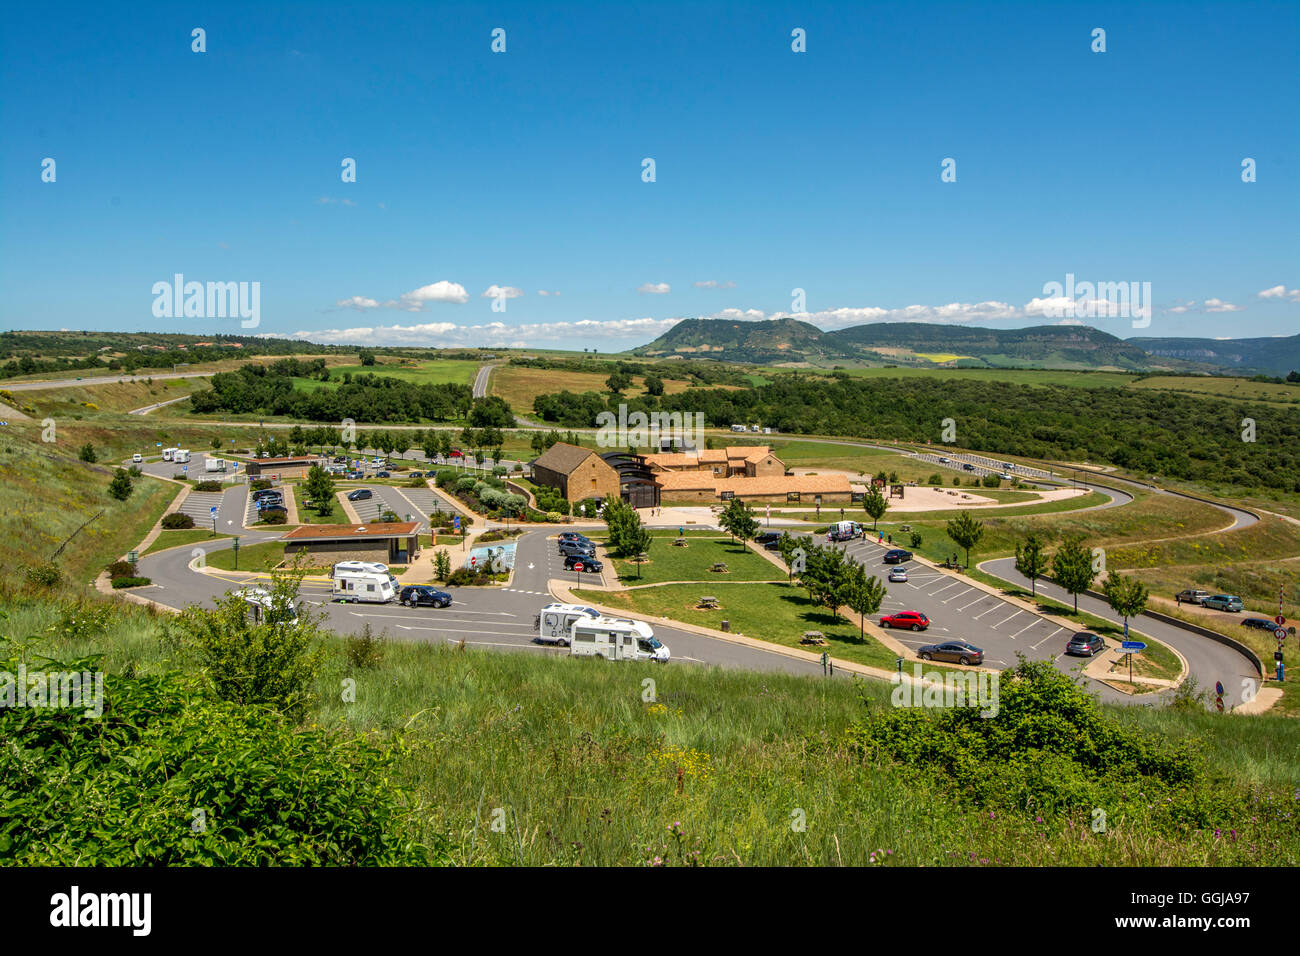 The rest area of Brocuejouls on A75 near Viaduct of Millau, Aveyron, France Stock Photo